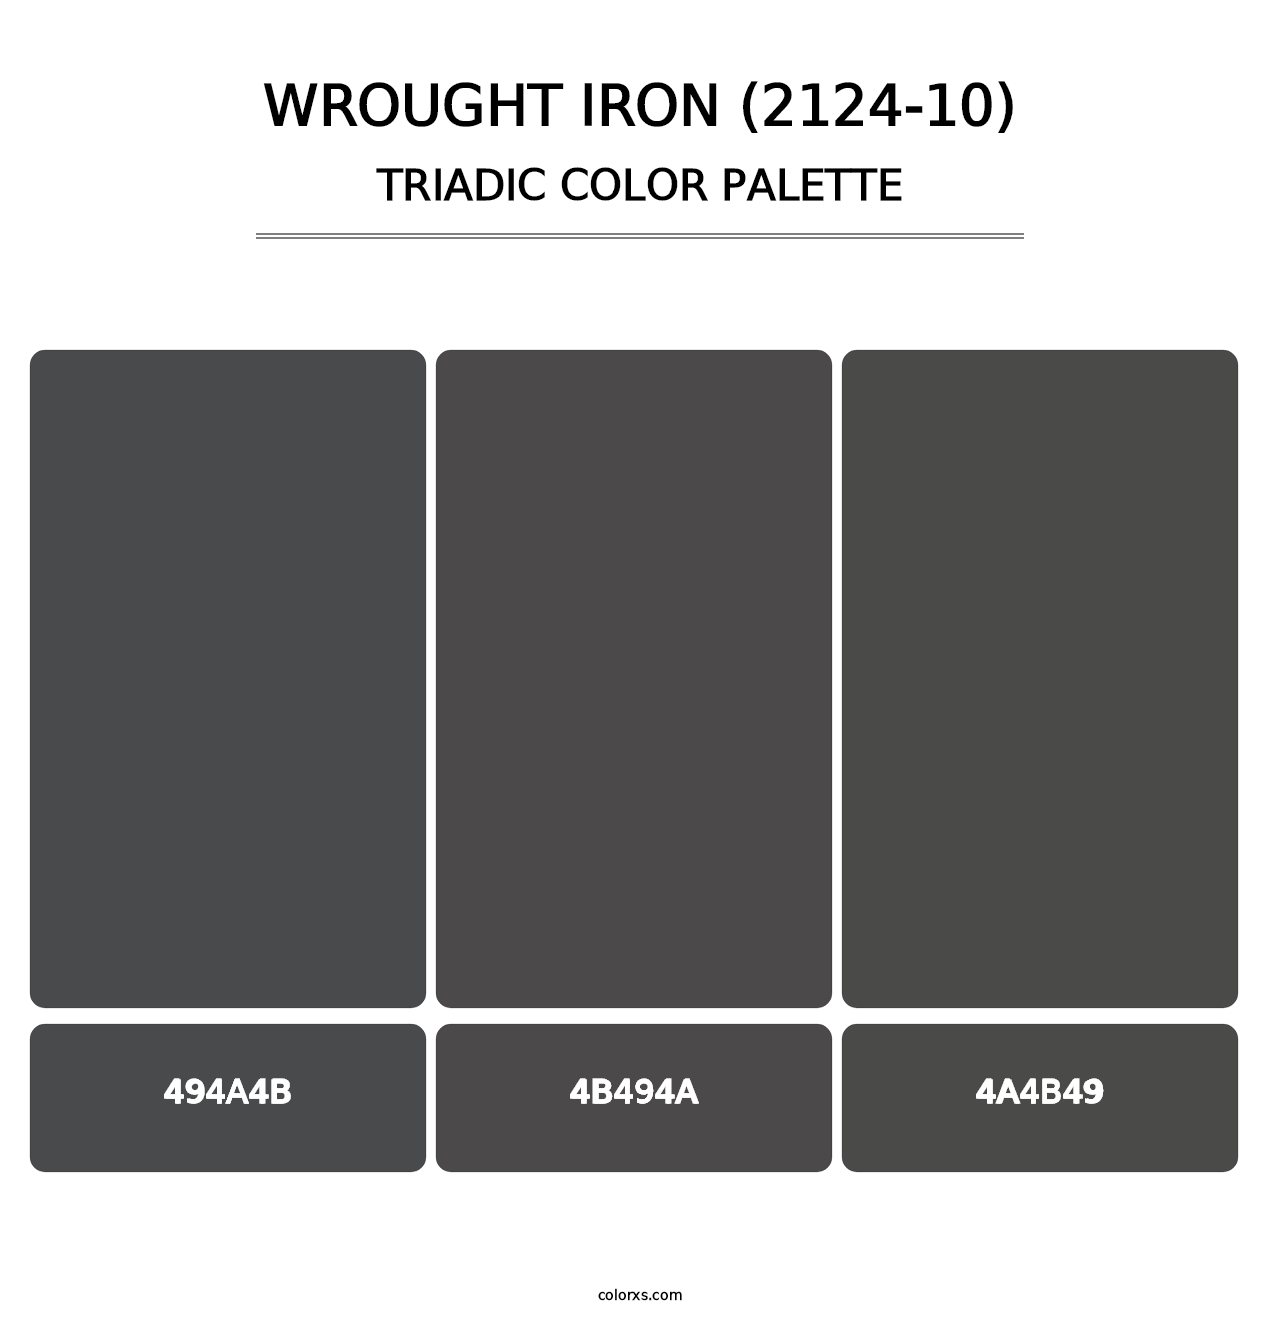 Wrought Iron (2124-10) - Triadic Color Palette